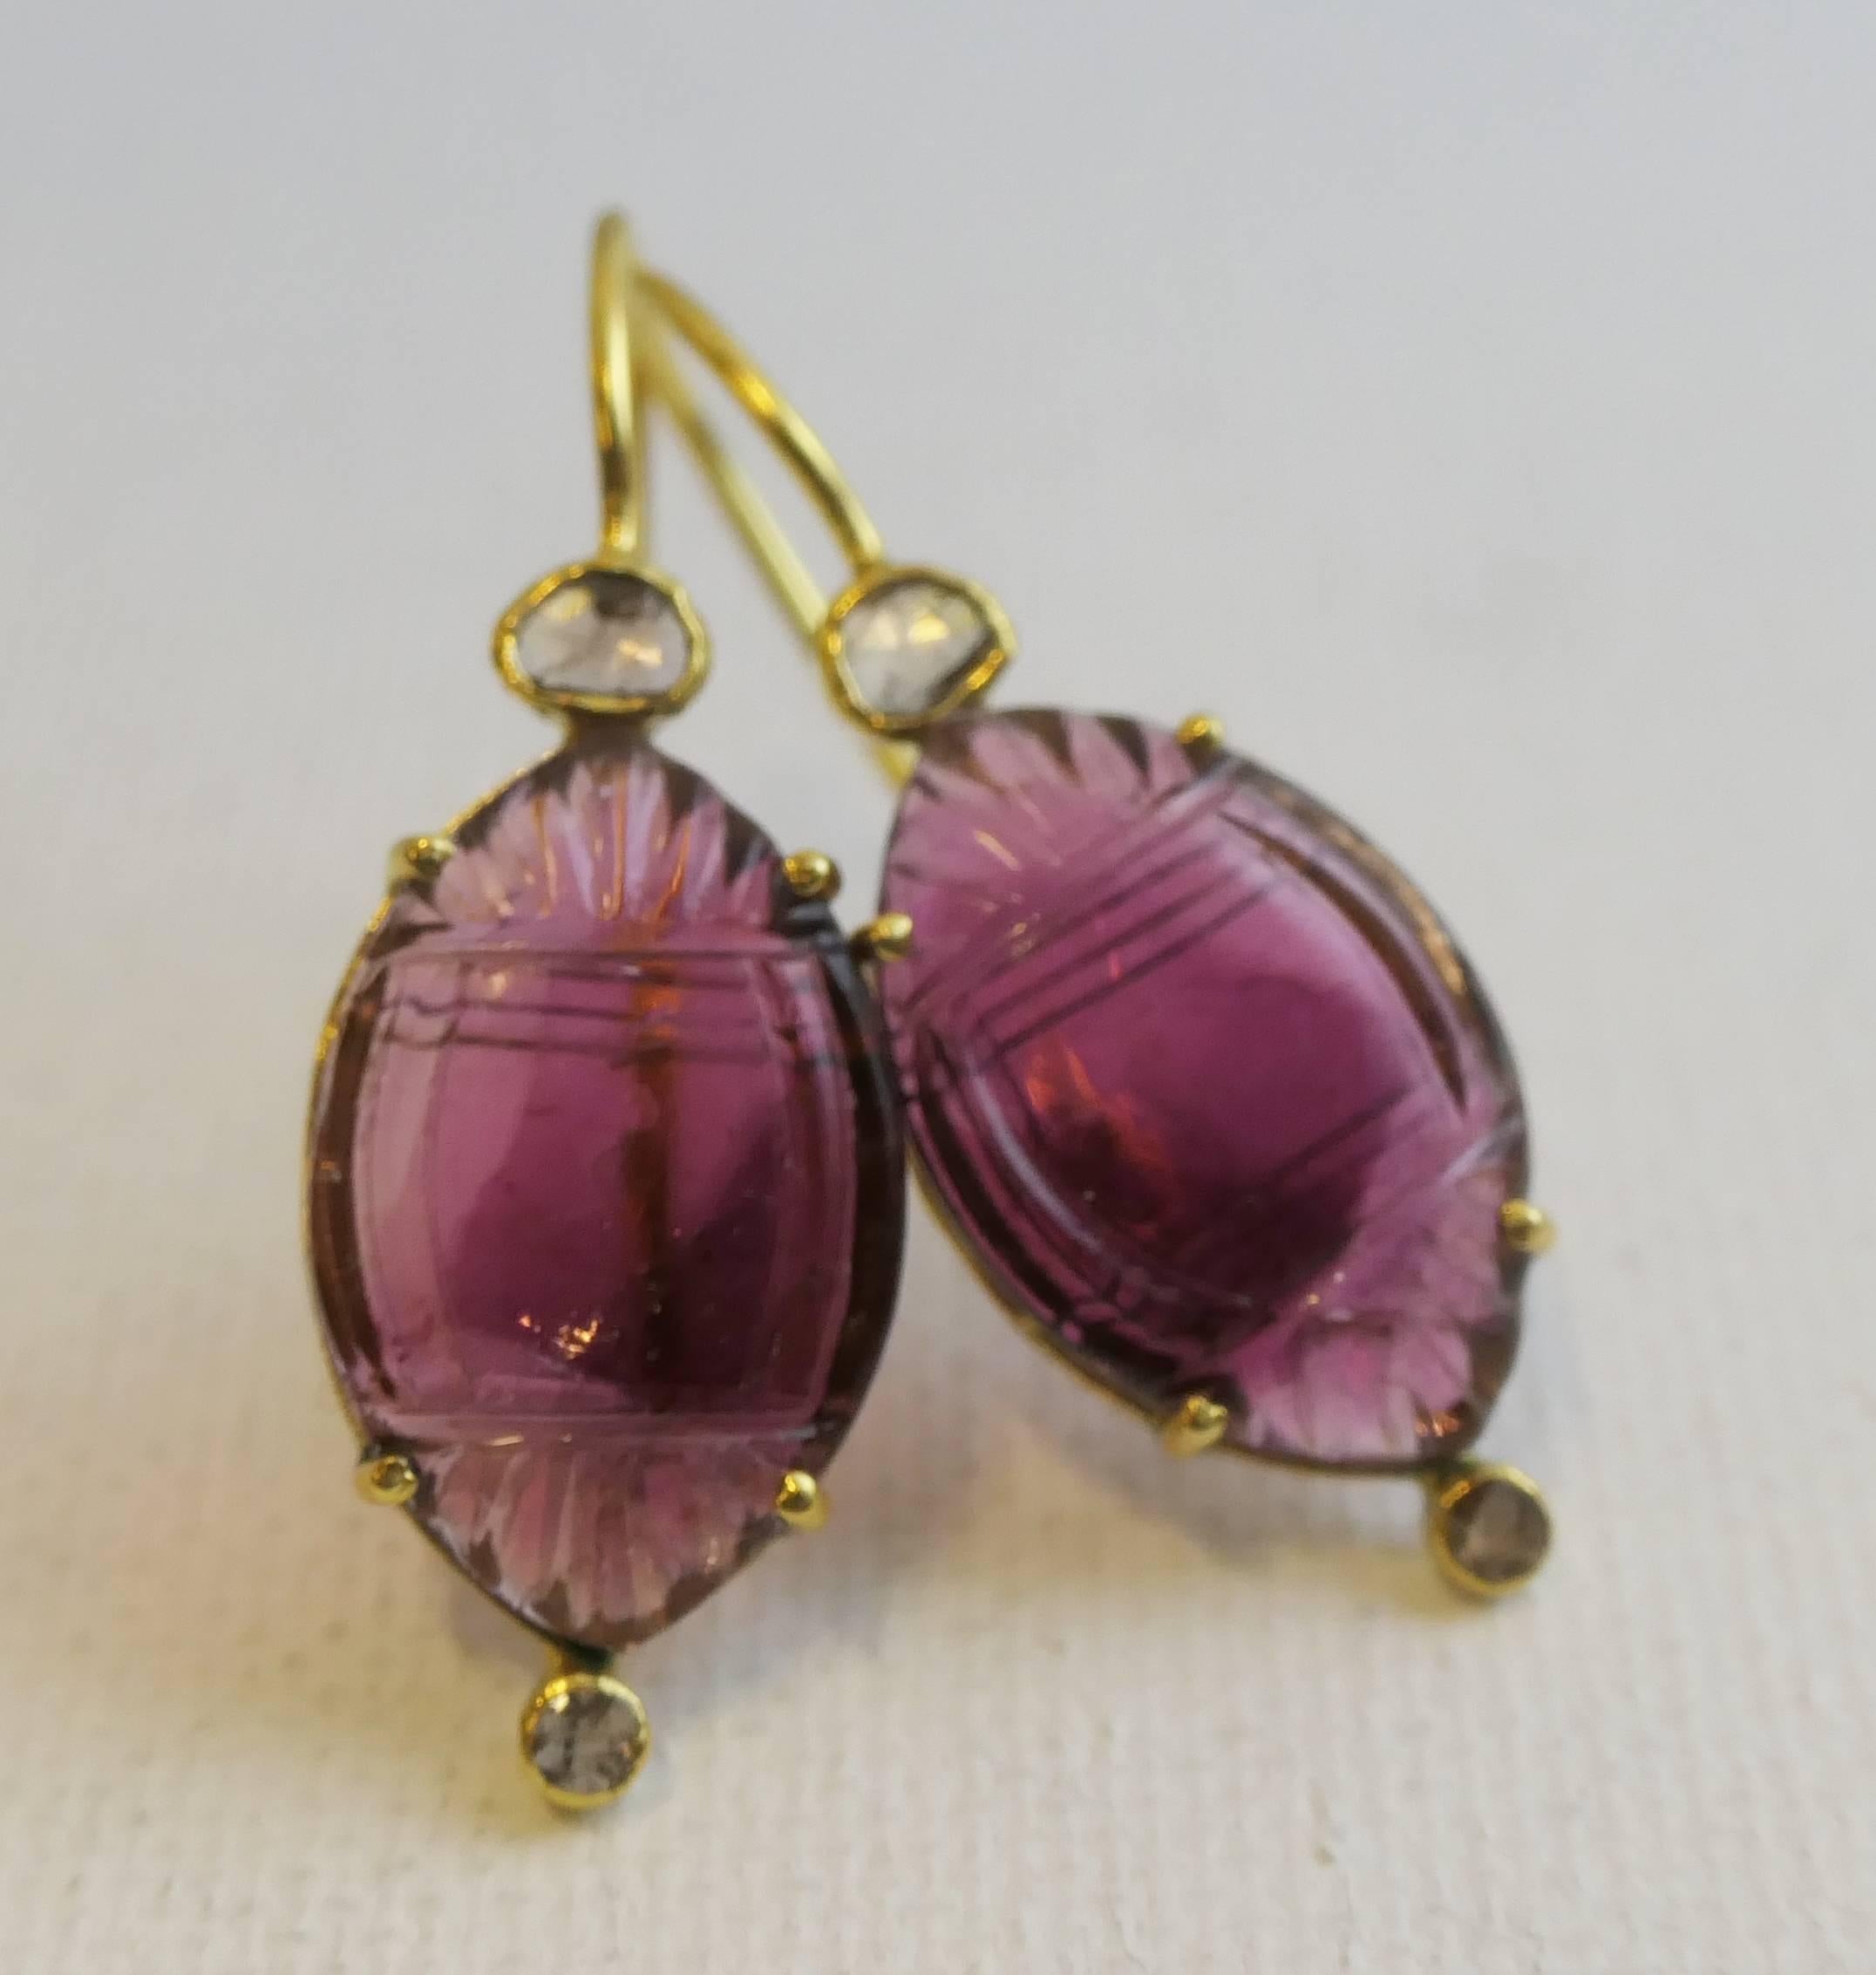 12x18mm Carved Pink Tourmaline are prong set in gold plated sterling silver.  There are two diamonds bezel set above and below the tourmaline.  Top one is approximately 3mm, while the bottom one is smaller at approximately 2mm.   
The length of